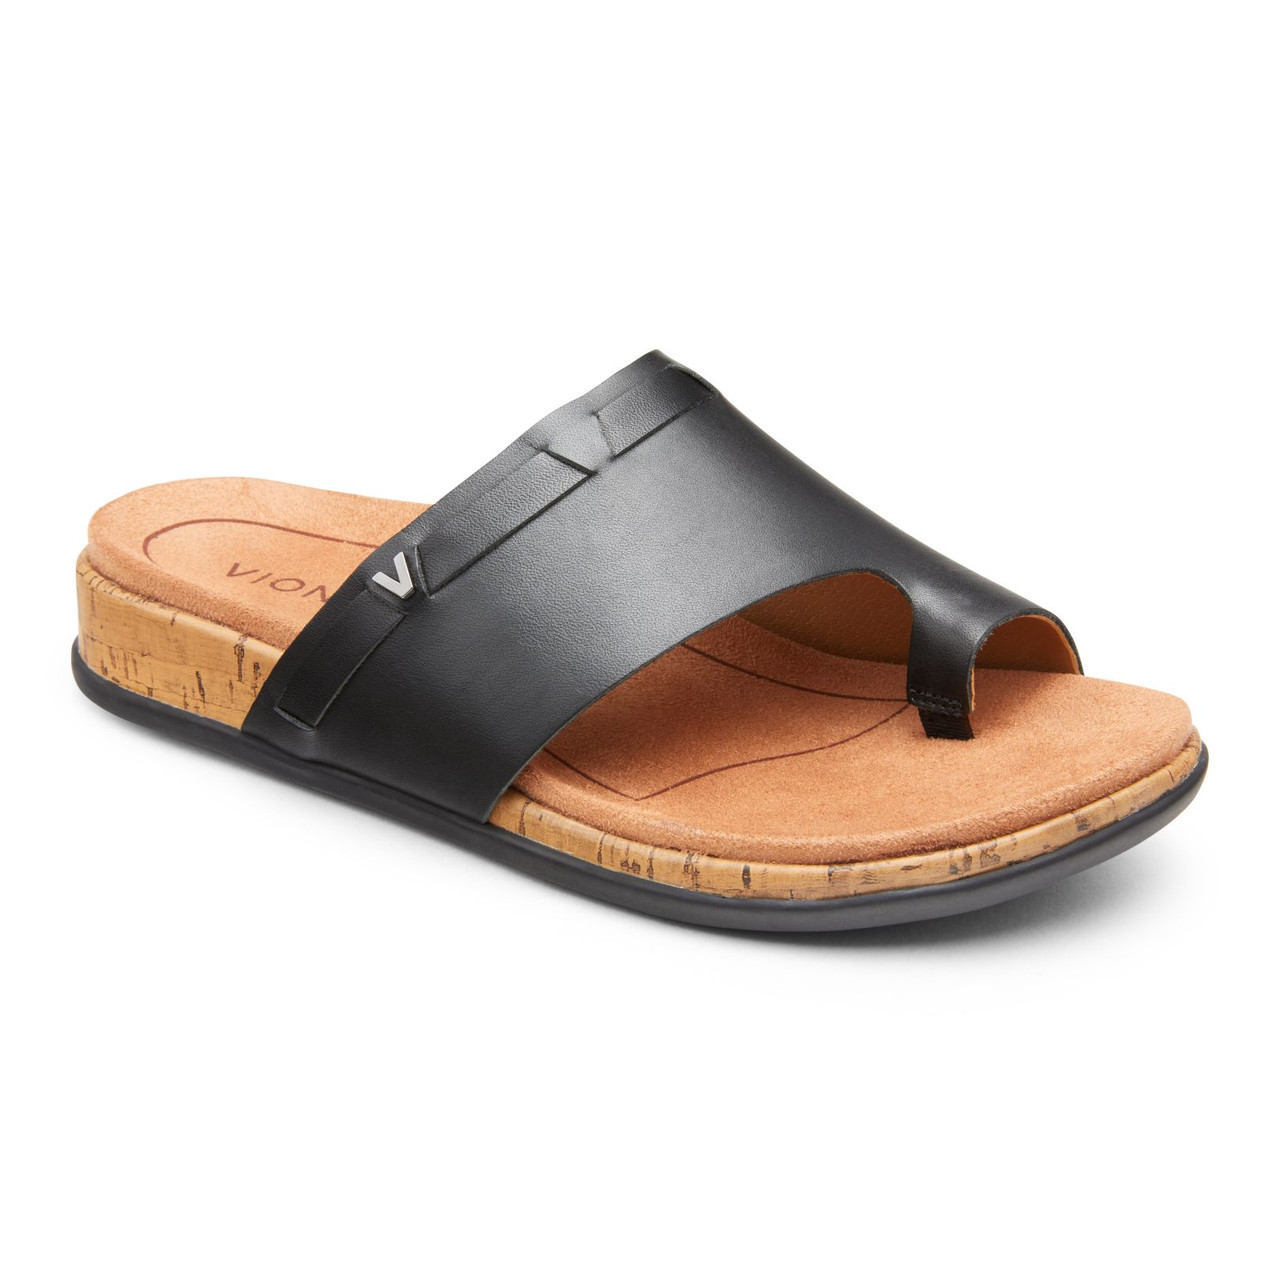 Luxury Womens Leather Slides Brown Flat Sandals Nu Pieds 05 Perfect For  Outdoor, Beach, And Casual Wear Comfortable Walking Shoes For Ladies From  Vernas, $21.11 | DHgate.Com